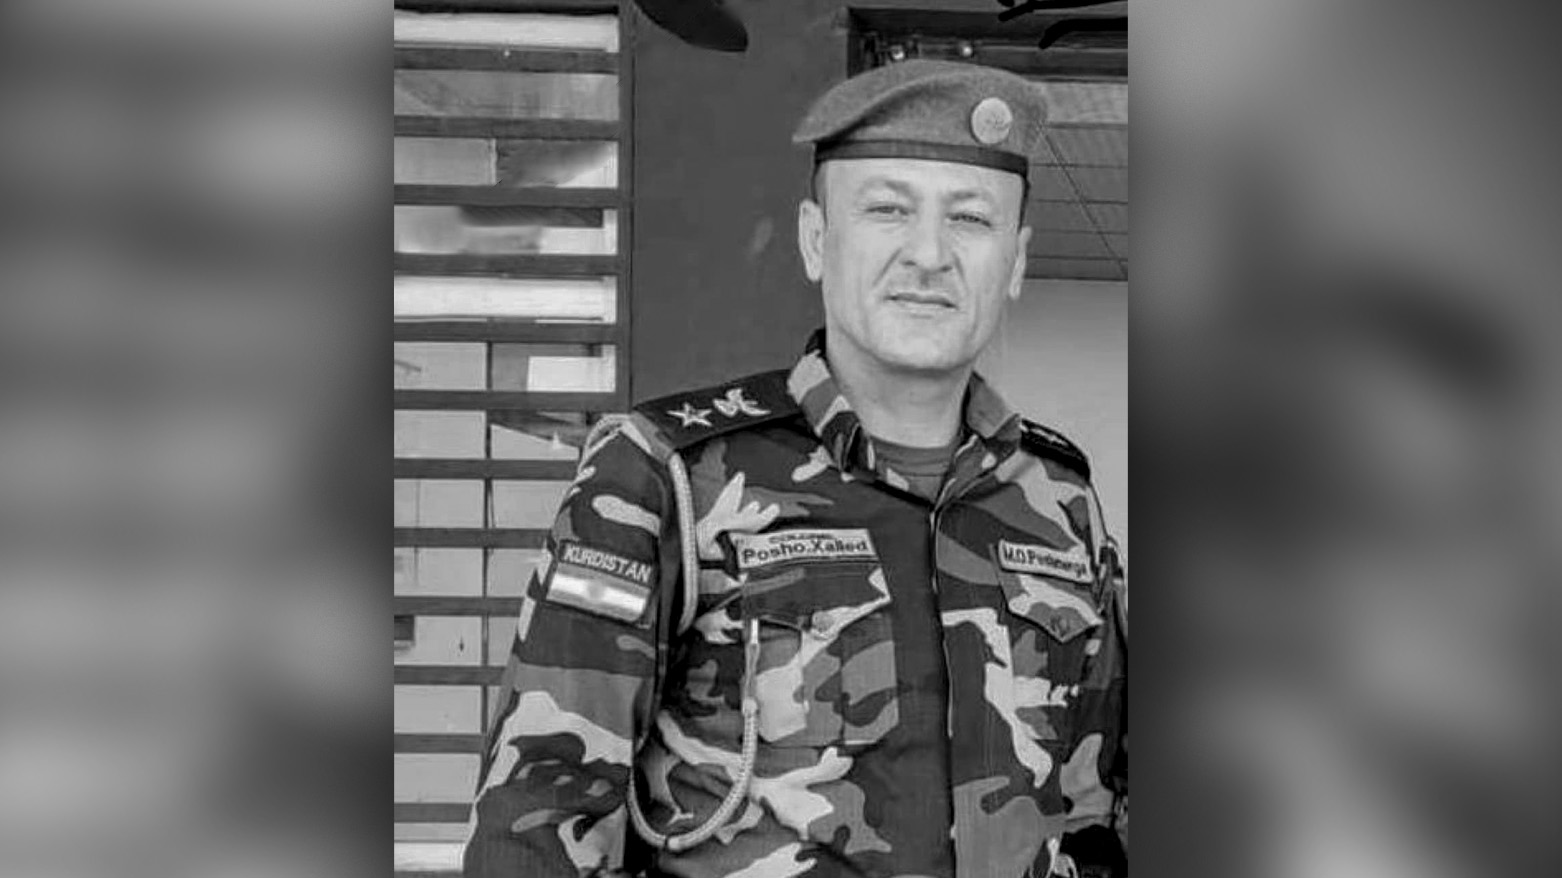 Lt. Colonel Poosho Khalid, deputy commander of 1st Regiment of 18th Brigade, died in Erbil on early Thursday. (Photo: Ministry of Peshmerga Affairs)